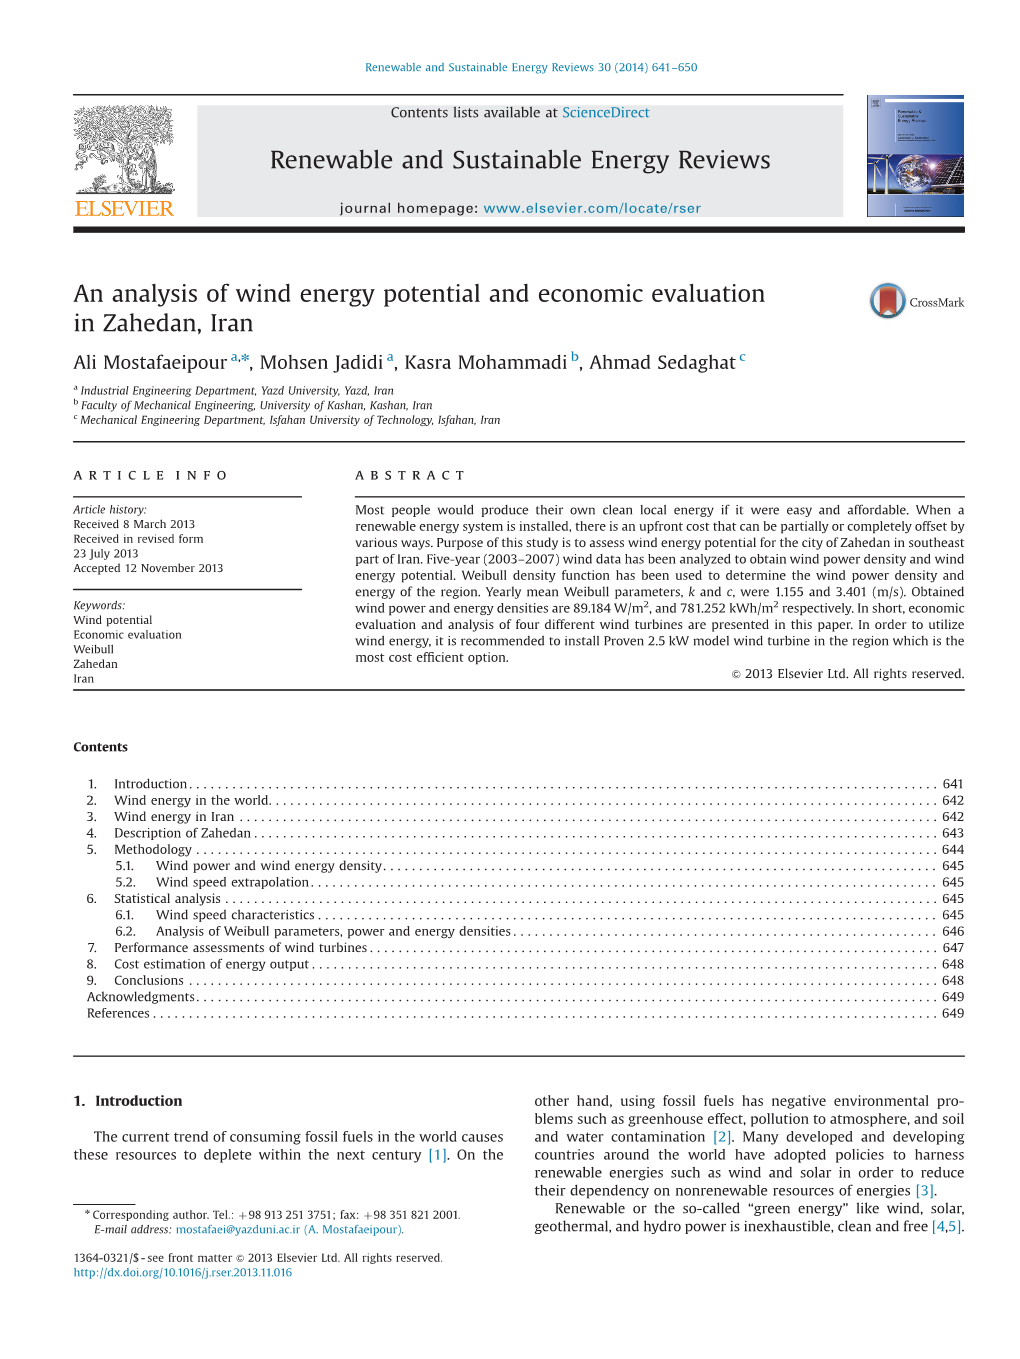 An Analysis of Wind Energy Potential and Economic Evaluation in Zahedan, Iran